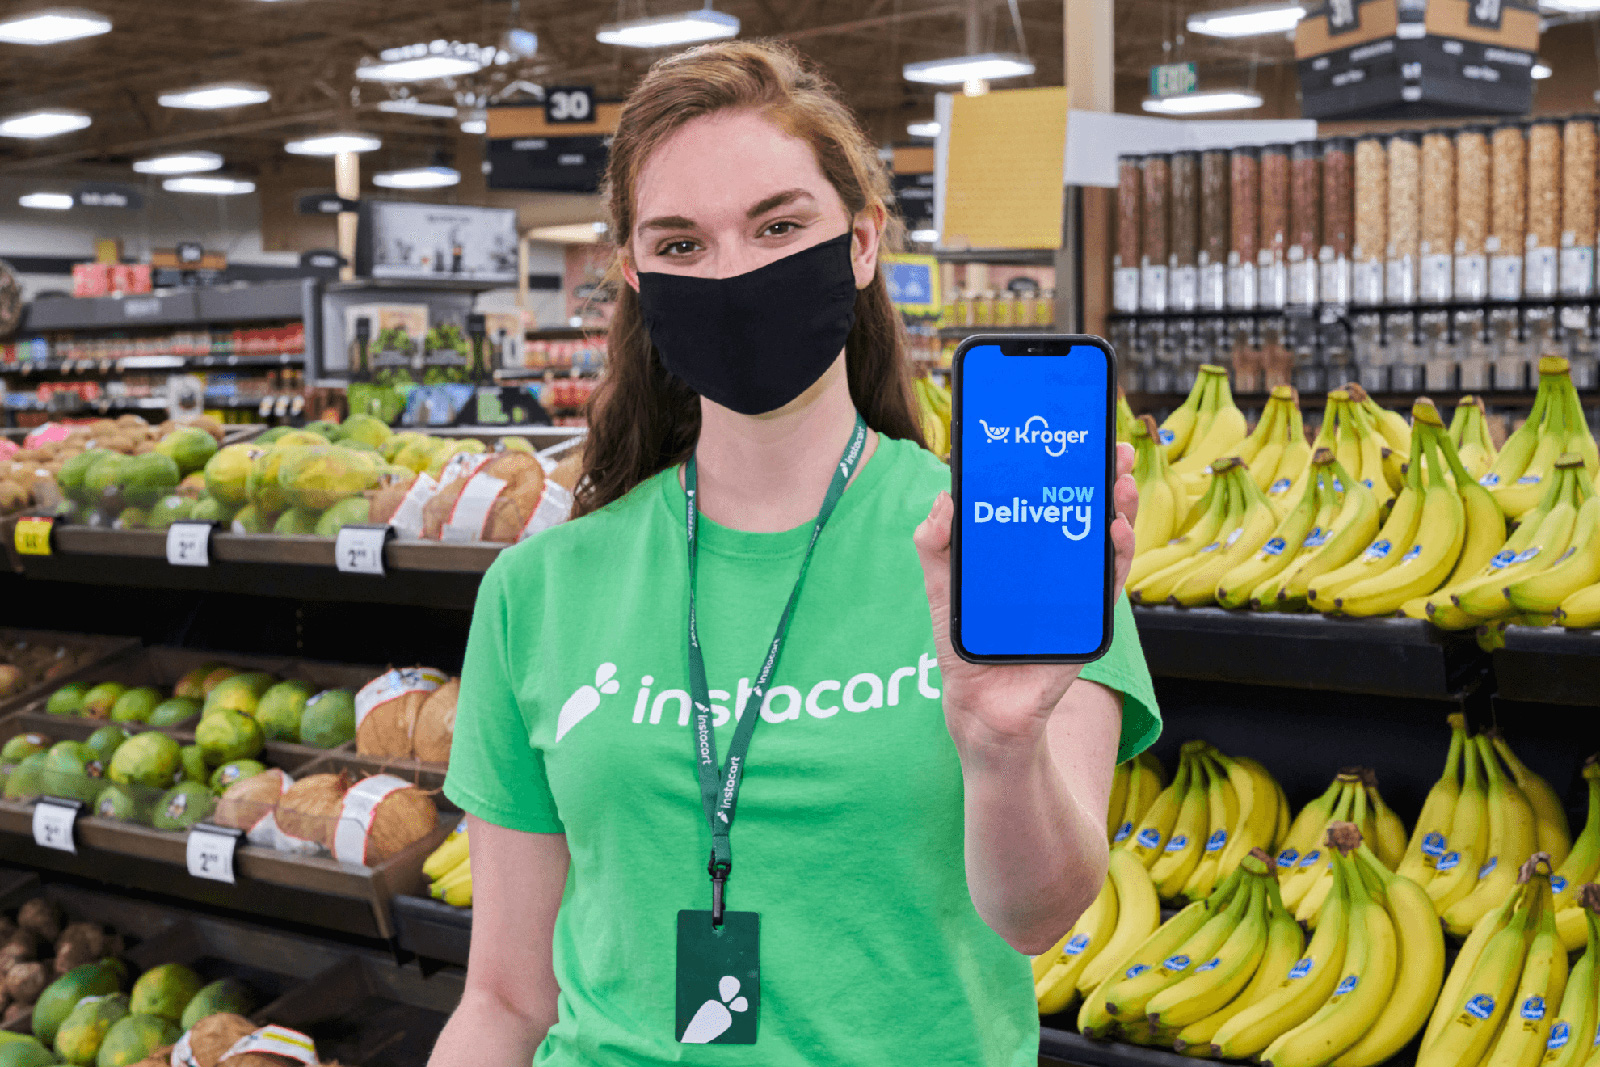 Kroger and Instacart promise grocery deliveries in as diminutive as Half-hour